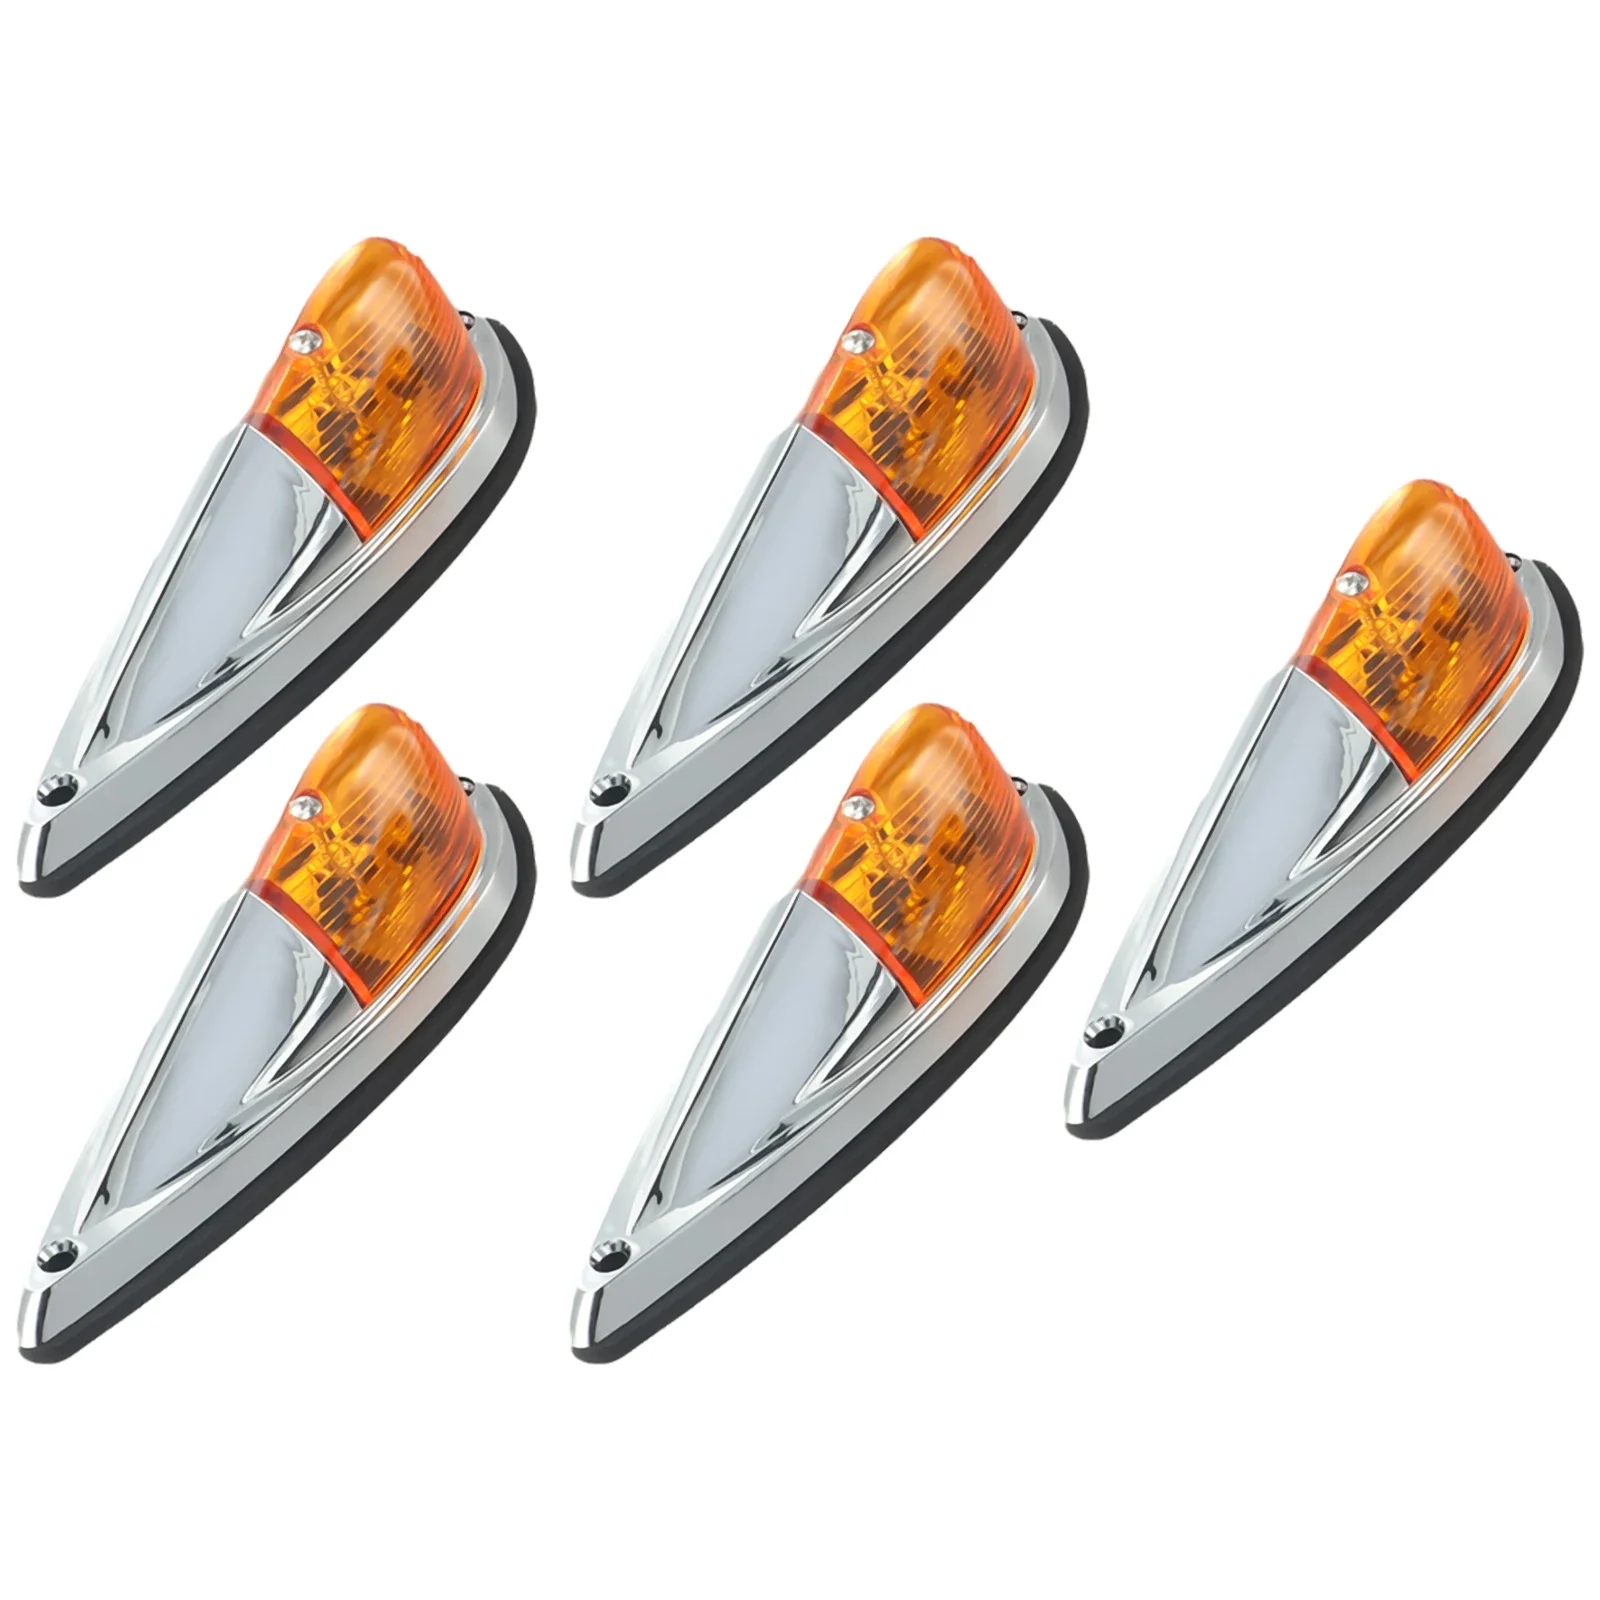 

Garden Indoor Cab Roof Lights Top Clearance Light 5 Pcs Accessories Amber Array DC 12V Front Parts Replacements